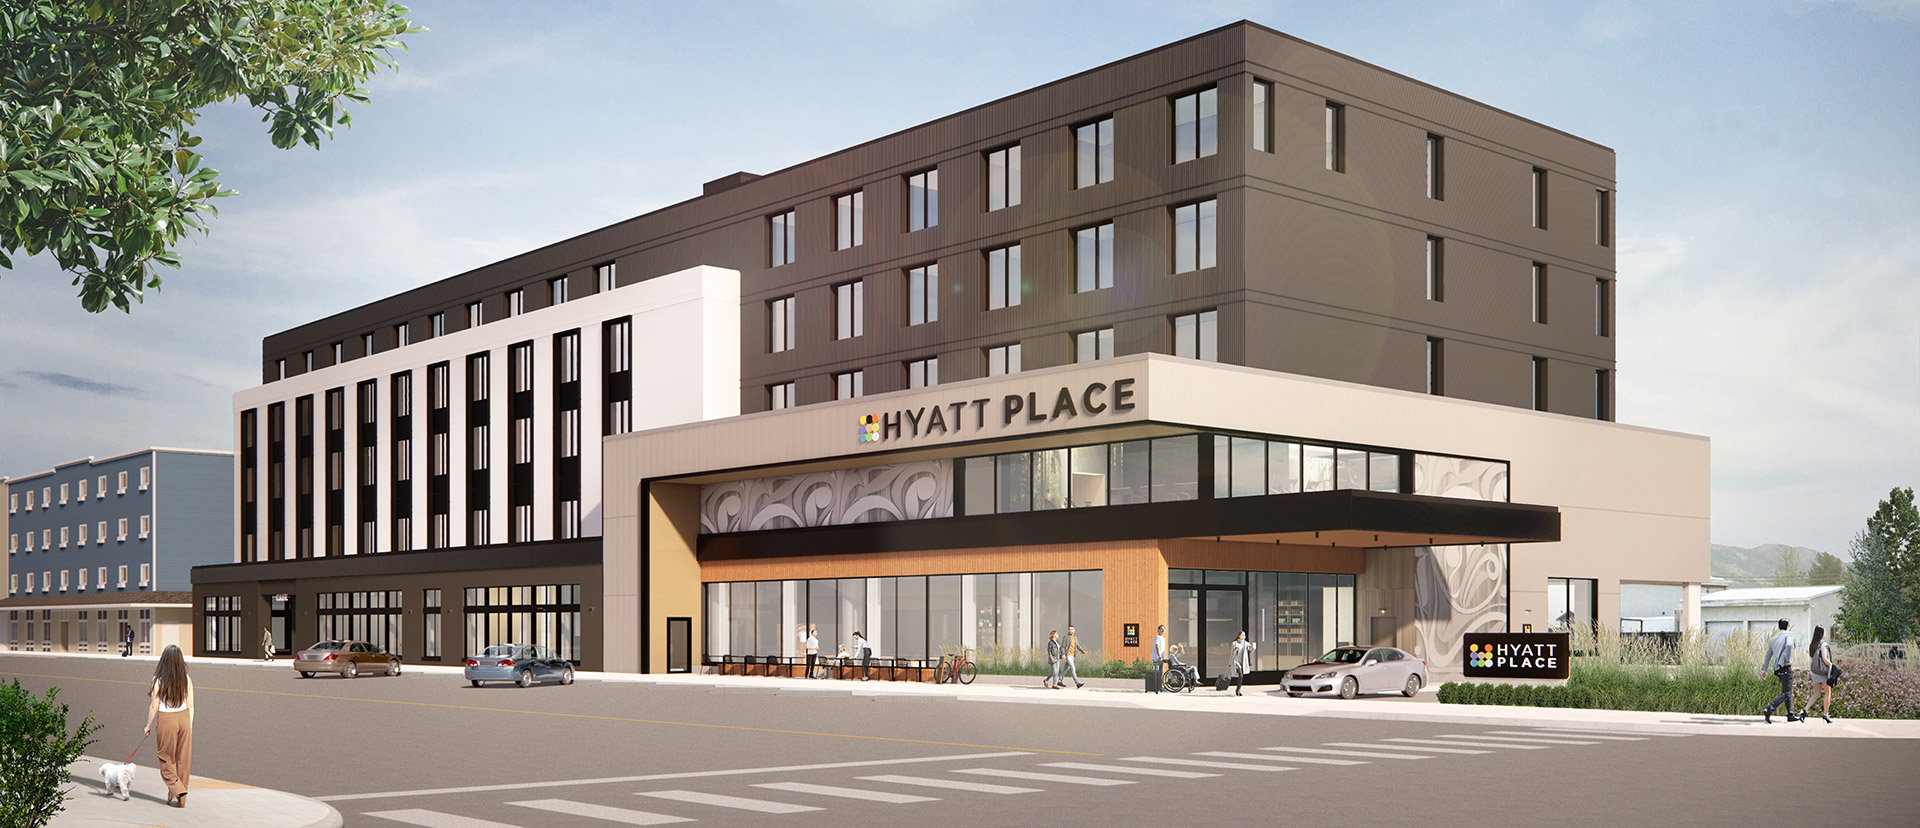 Hyatt Place Whitehorse Hotel Conceptional Drawing of Exterior